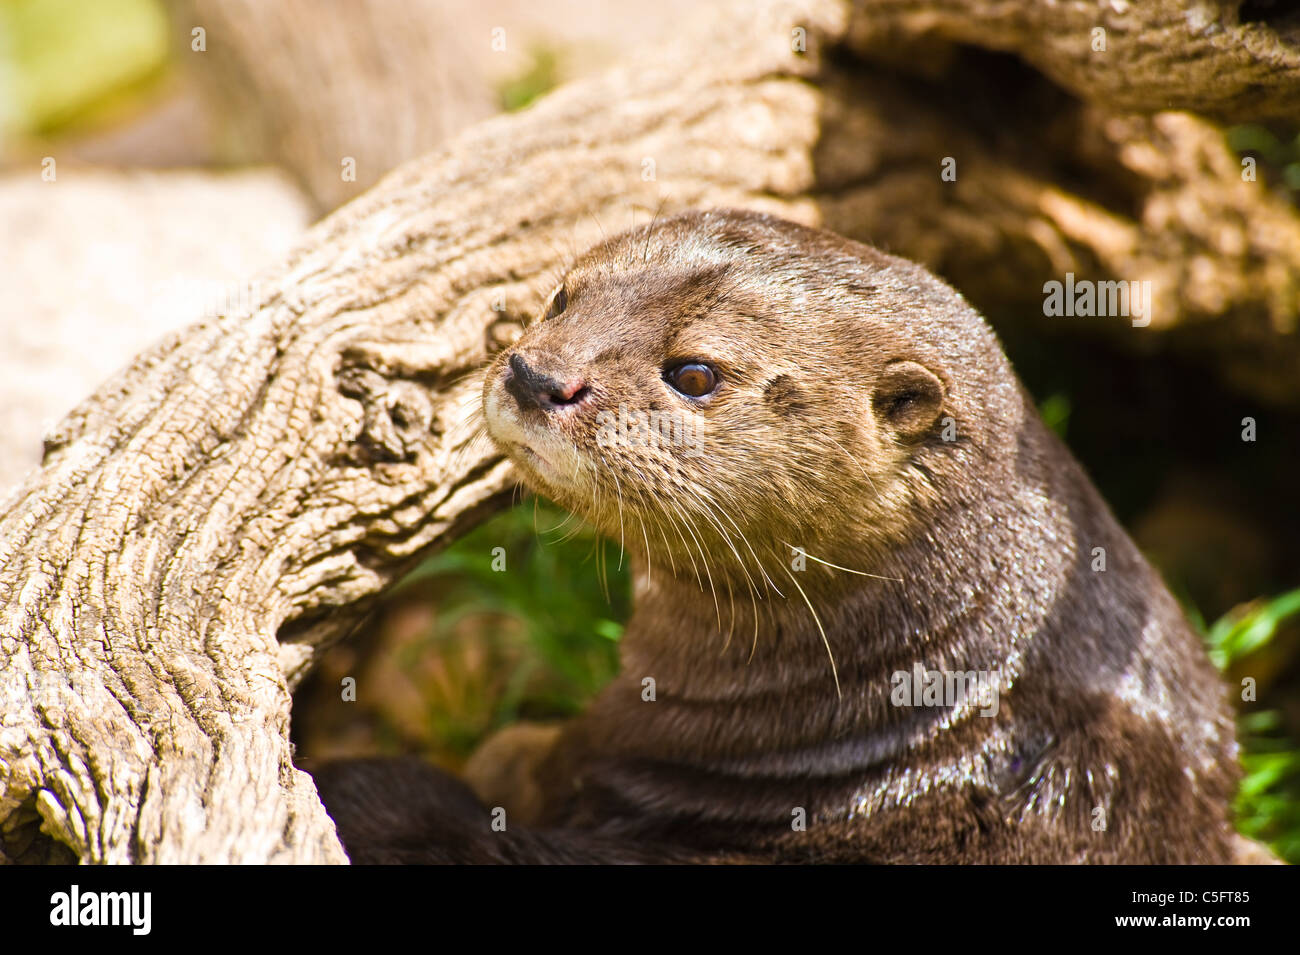 The North American river otter (Lontra canadensis), also known as the northern river otter or the common otter, is a semiaquatic Stock Photo